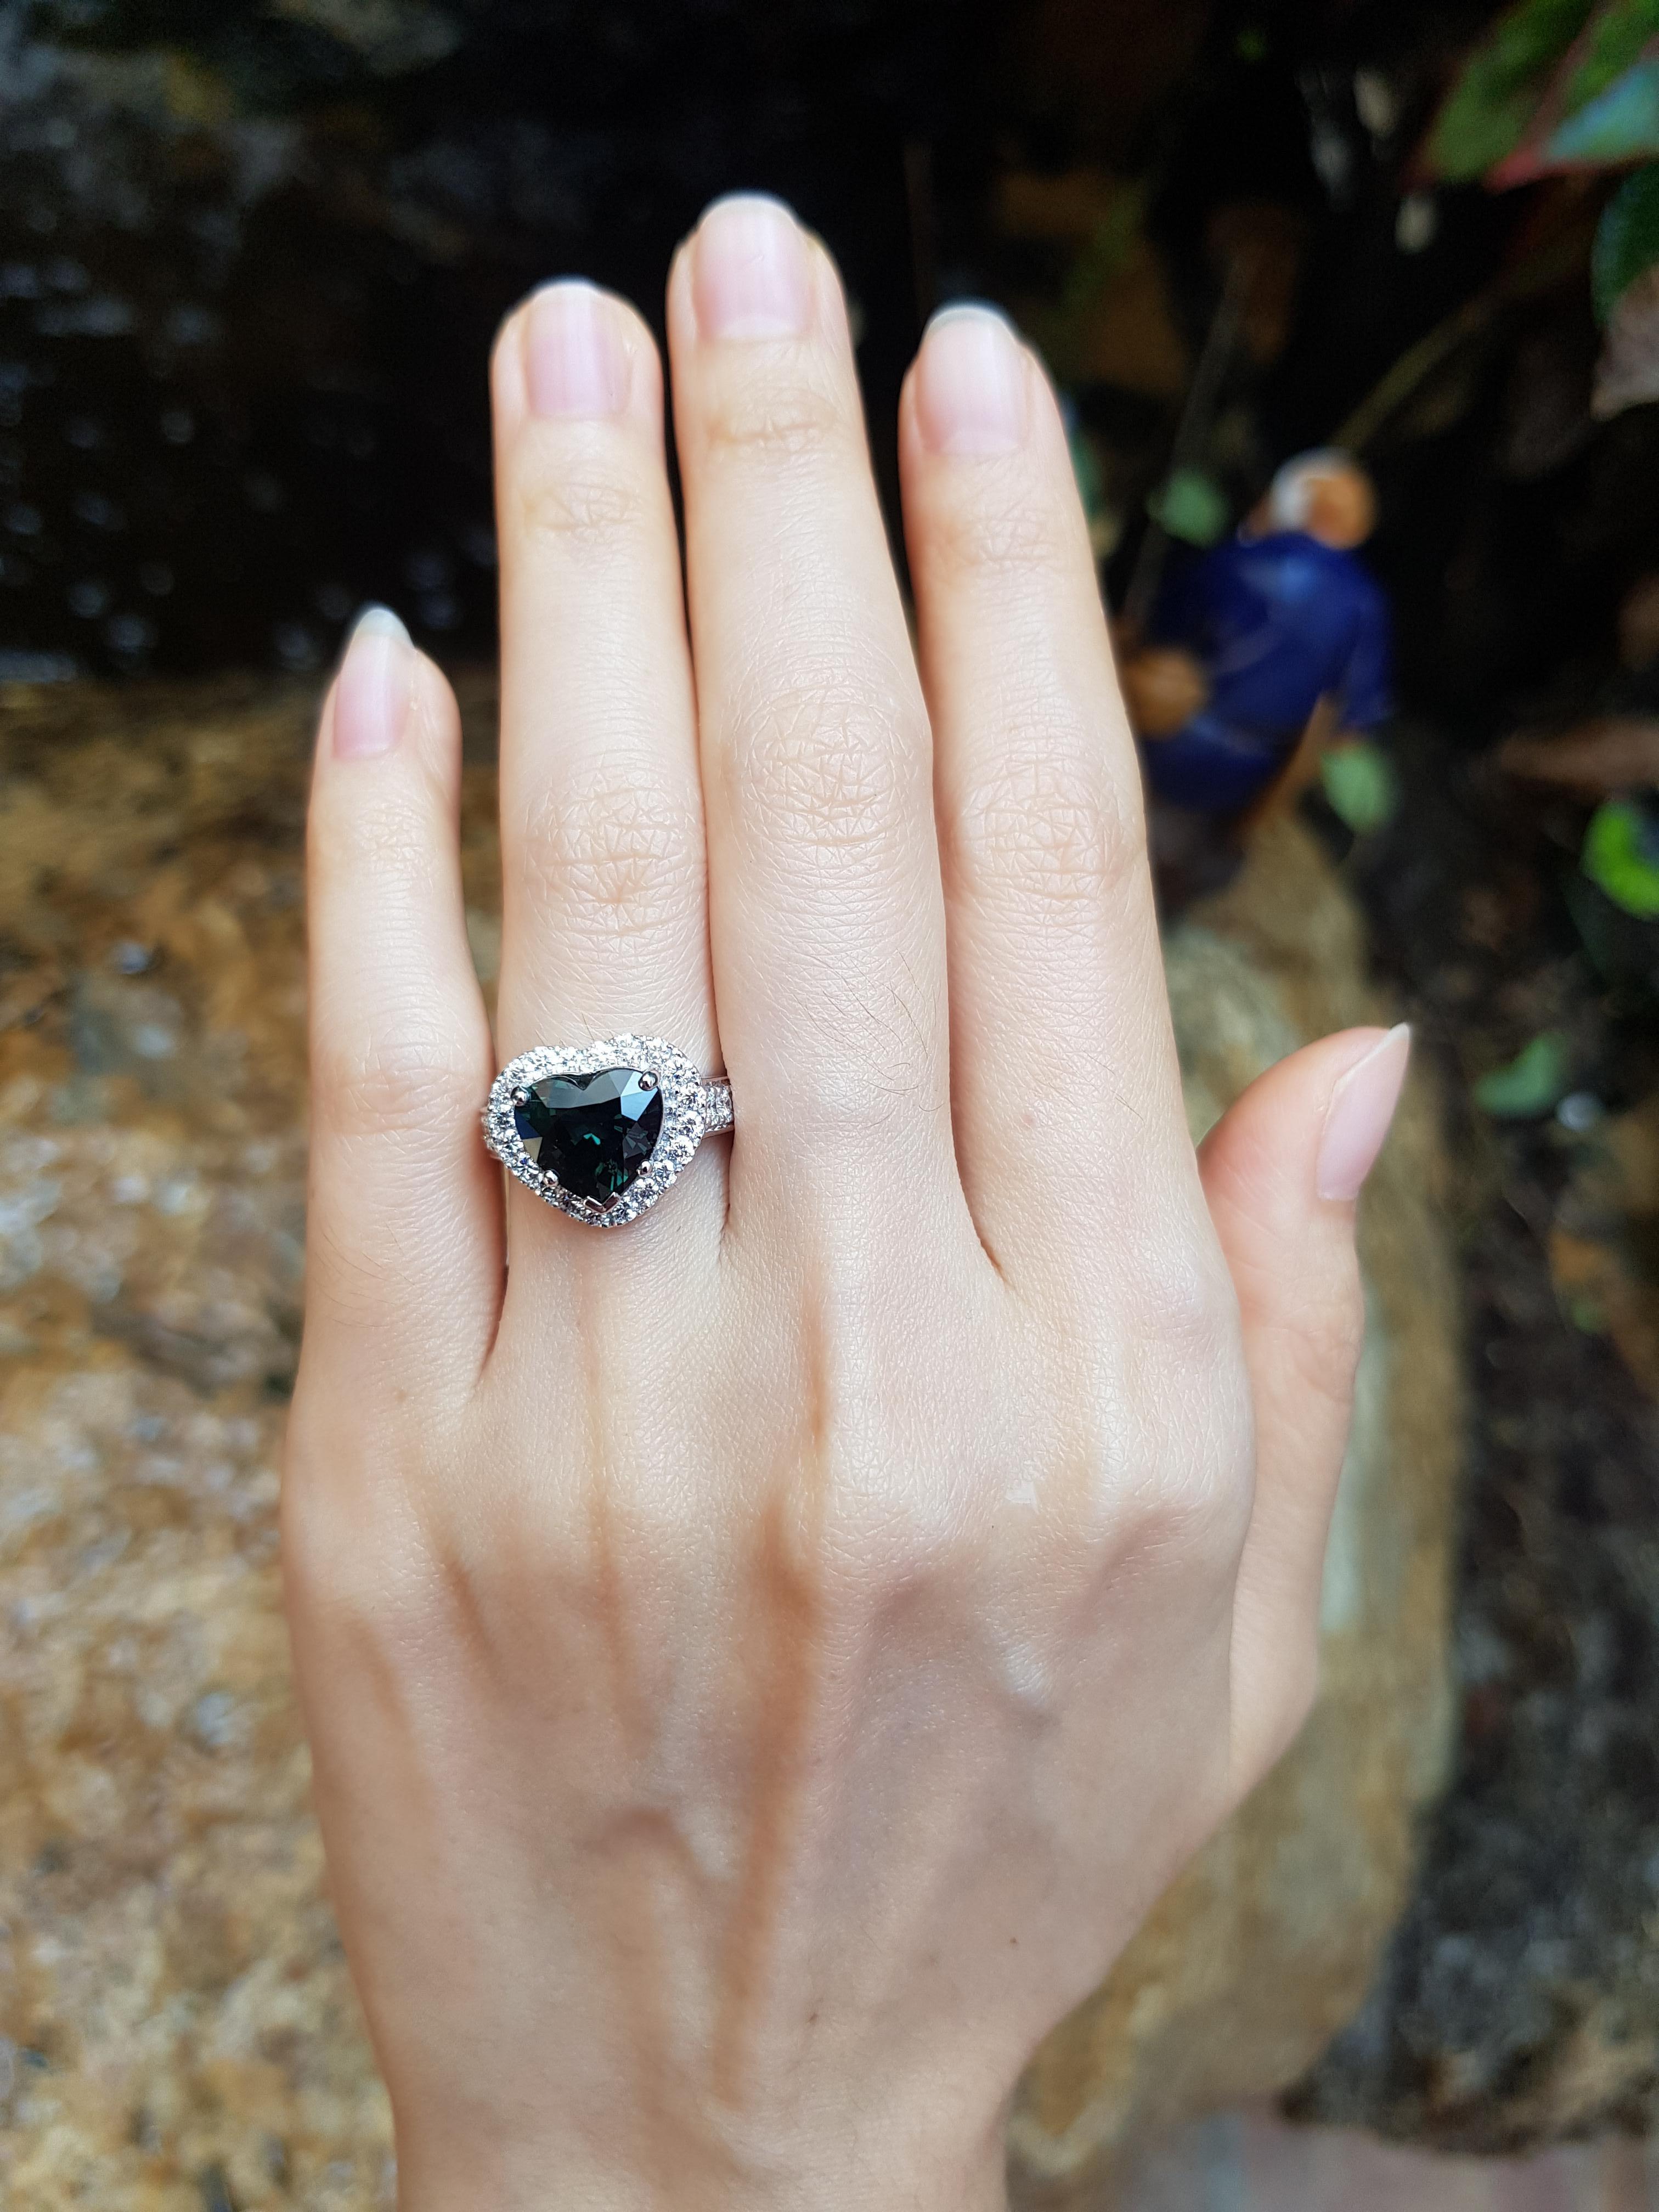 Blue Sapphire 2.40 carats with Diamond 0.40 carat Ring set in 18 Karat White Gold Settings

Width: 1.7 cm
Length: 1.7 cm 
Ring Size: 52

